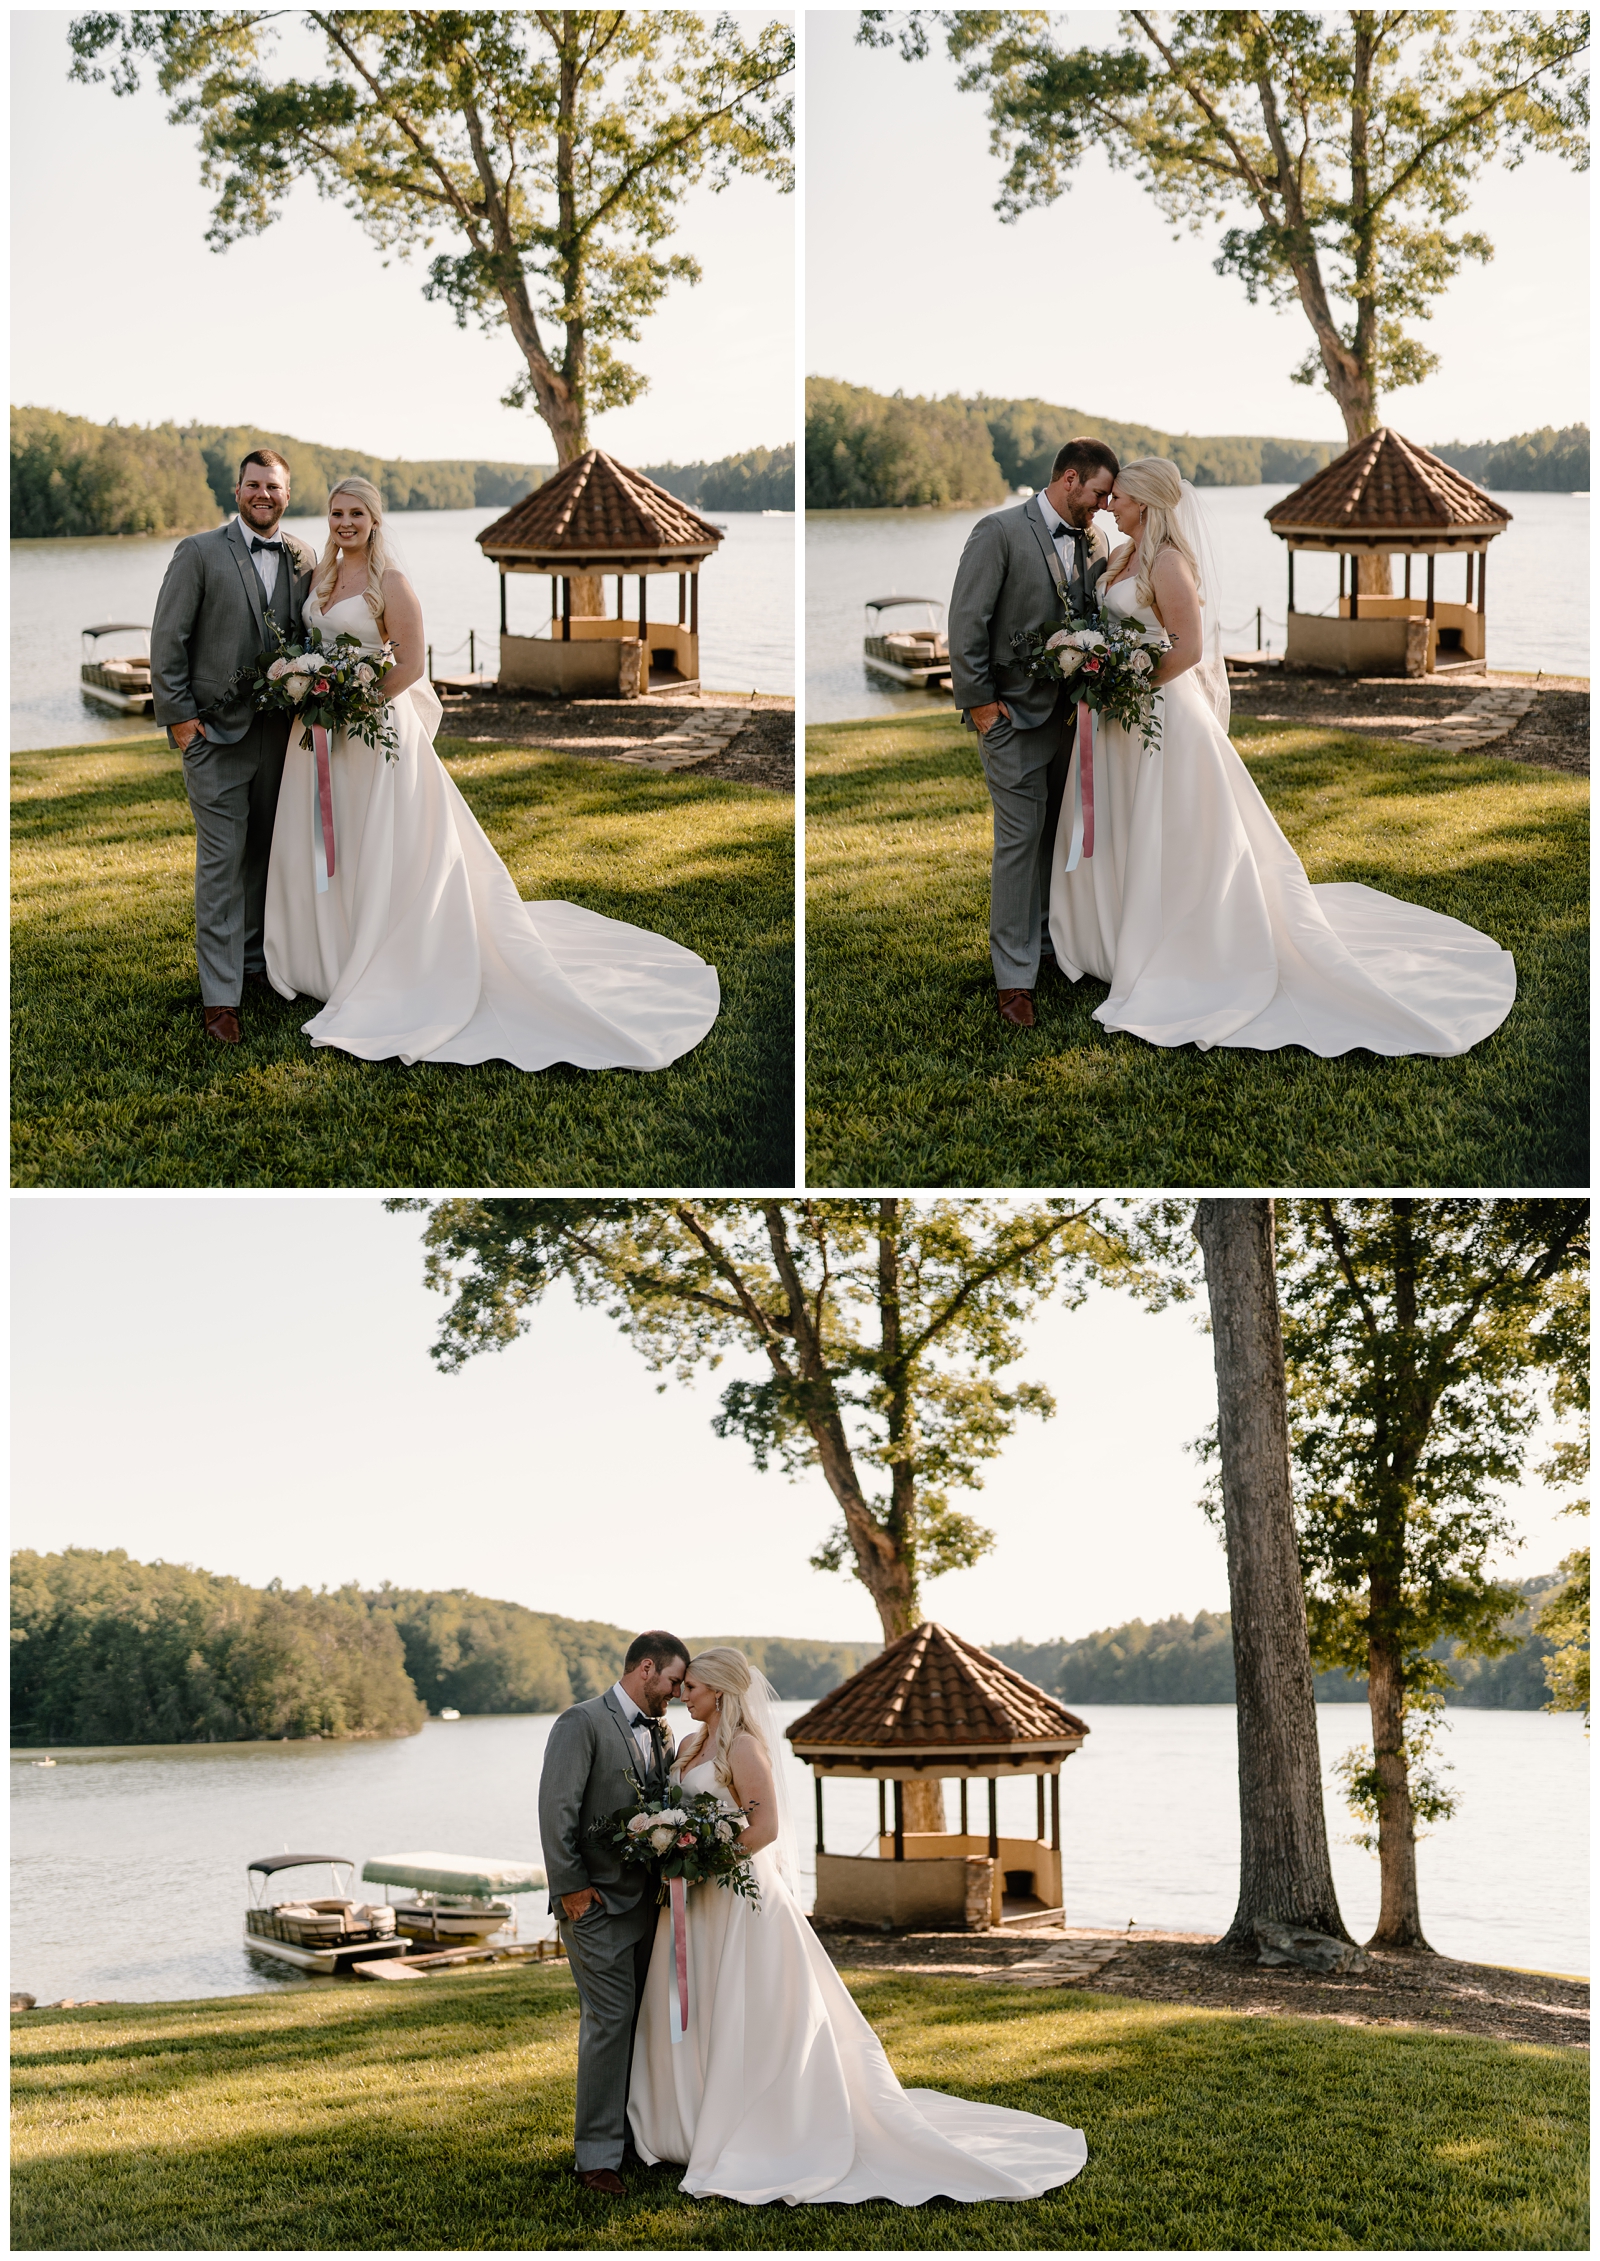 Southern bride and groom's lakeside wedding portraits in North Carolina - by Winston-Salem, NC photographer